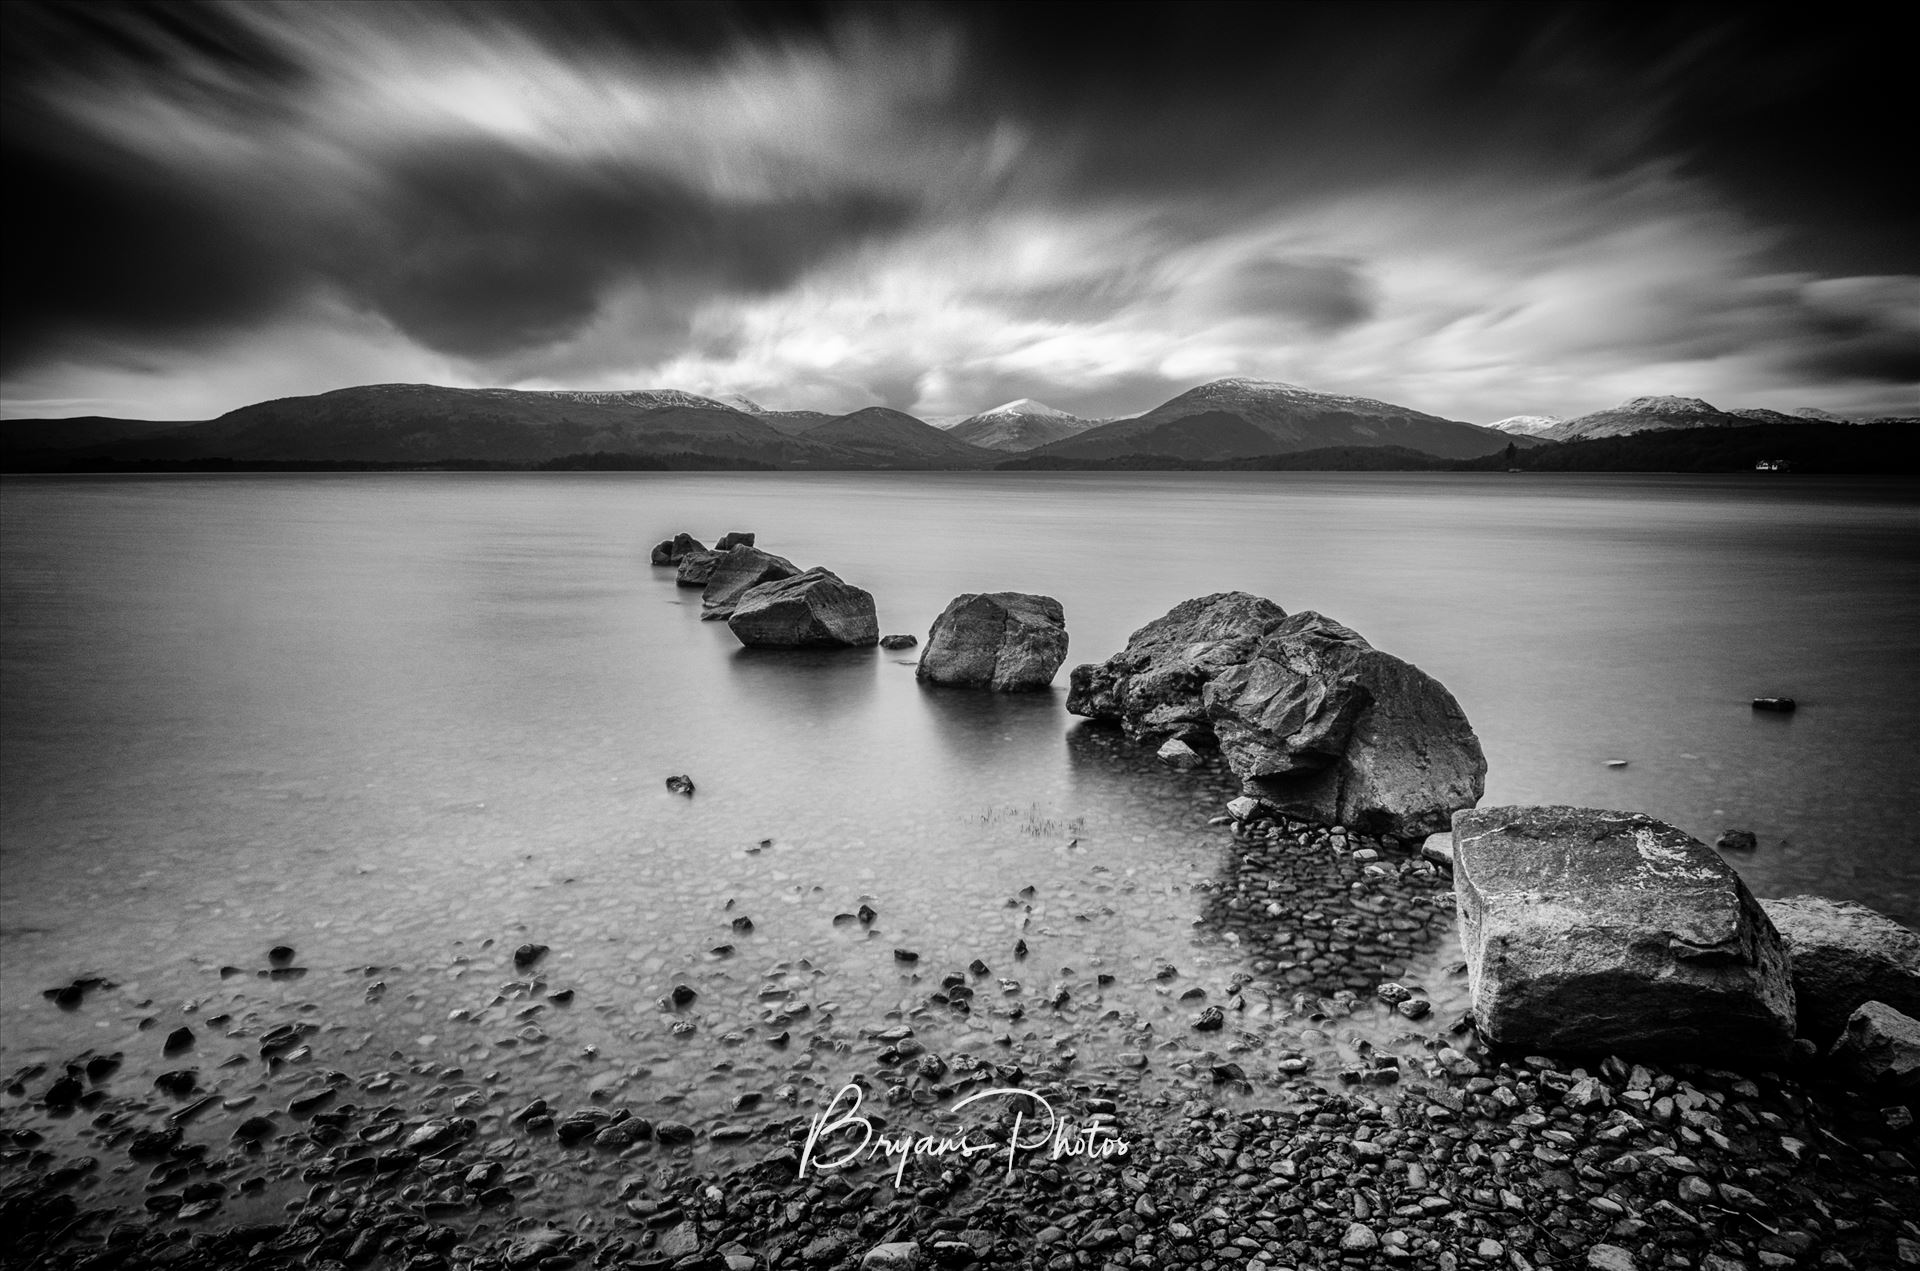 Milarrochy Bay Loch Lomond A black and white long exposure photograph of Loch Lomond taken from Milarrochy Bay. by Bryans Photos